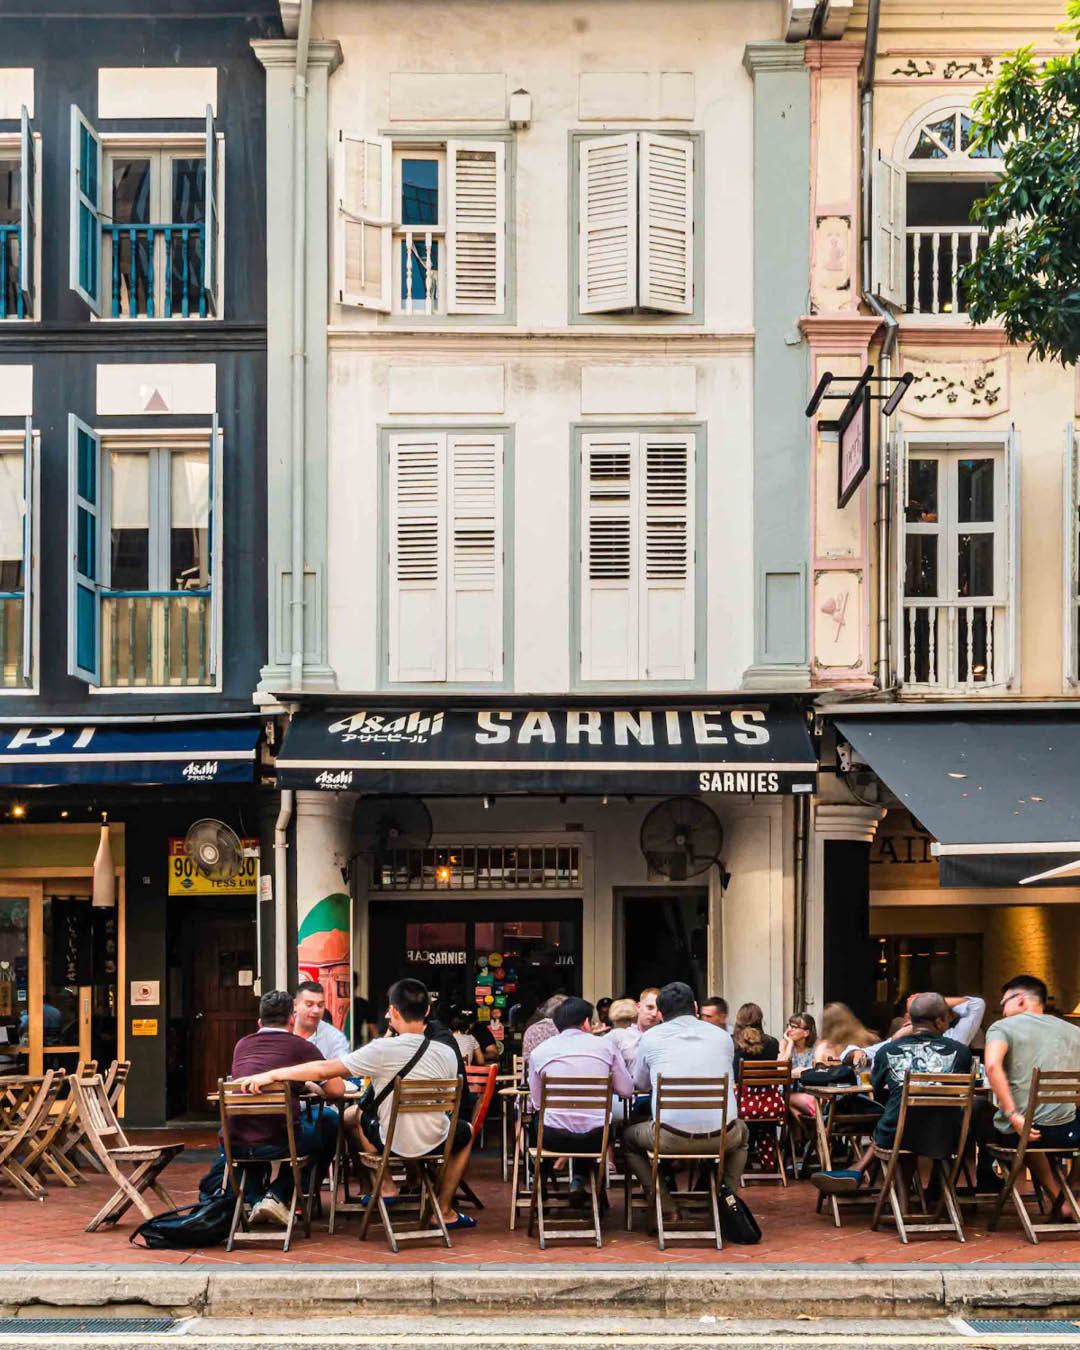 People sit outside Sarnies cafe in Singapore on outdoor tables and chairs